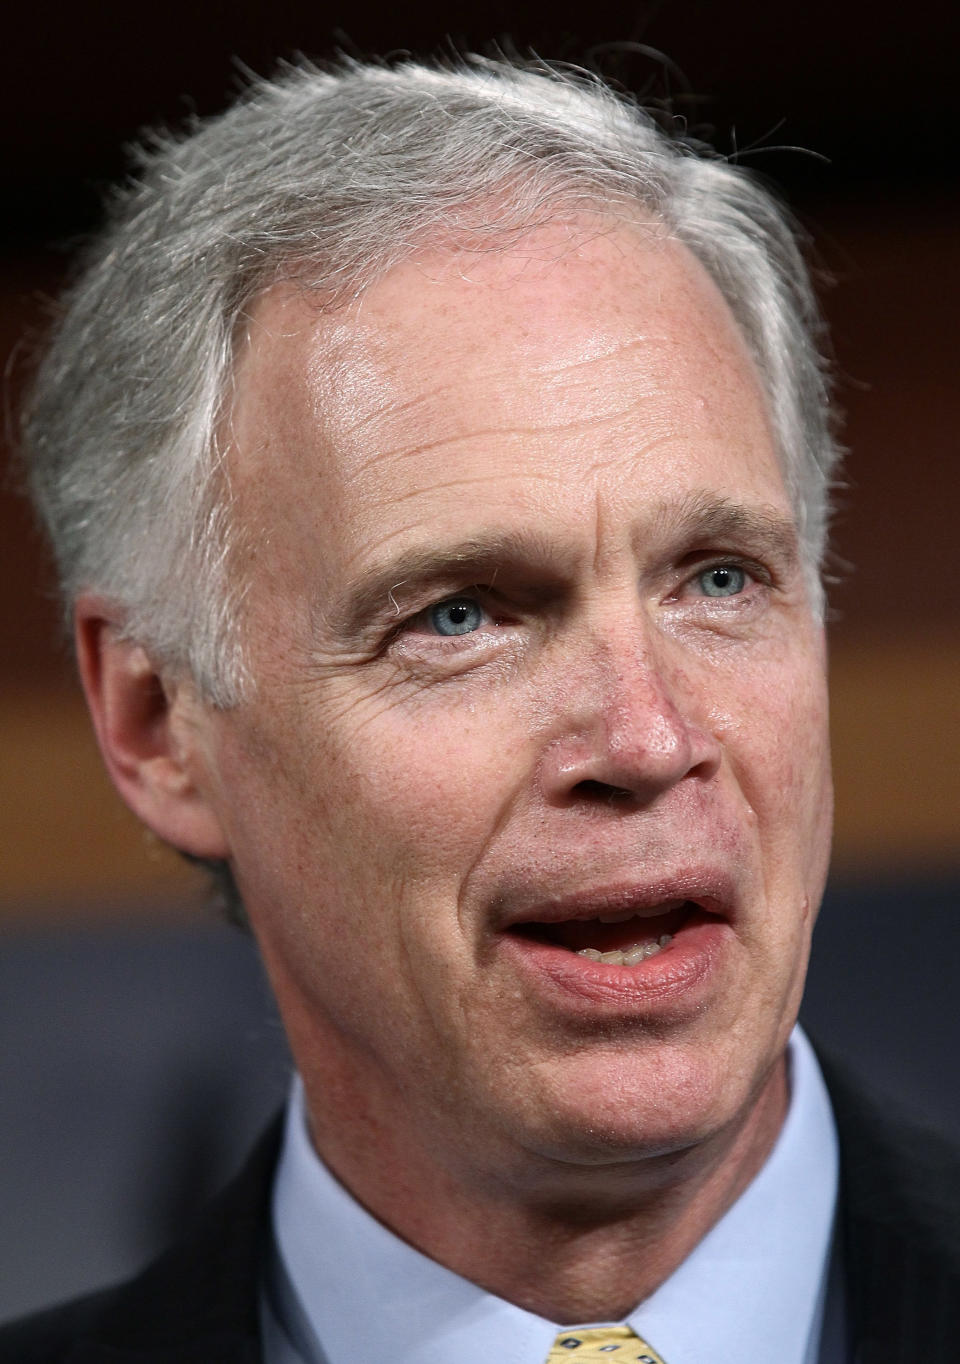 U.S. Sen. Ron Johnson (R-Wis.) holds a press conference at the U.S. Capitol March 1, 2012 in Washington, D.C. (Photo by Win McNamee/Getty Images)